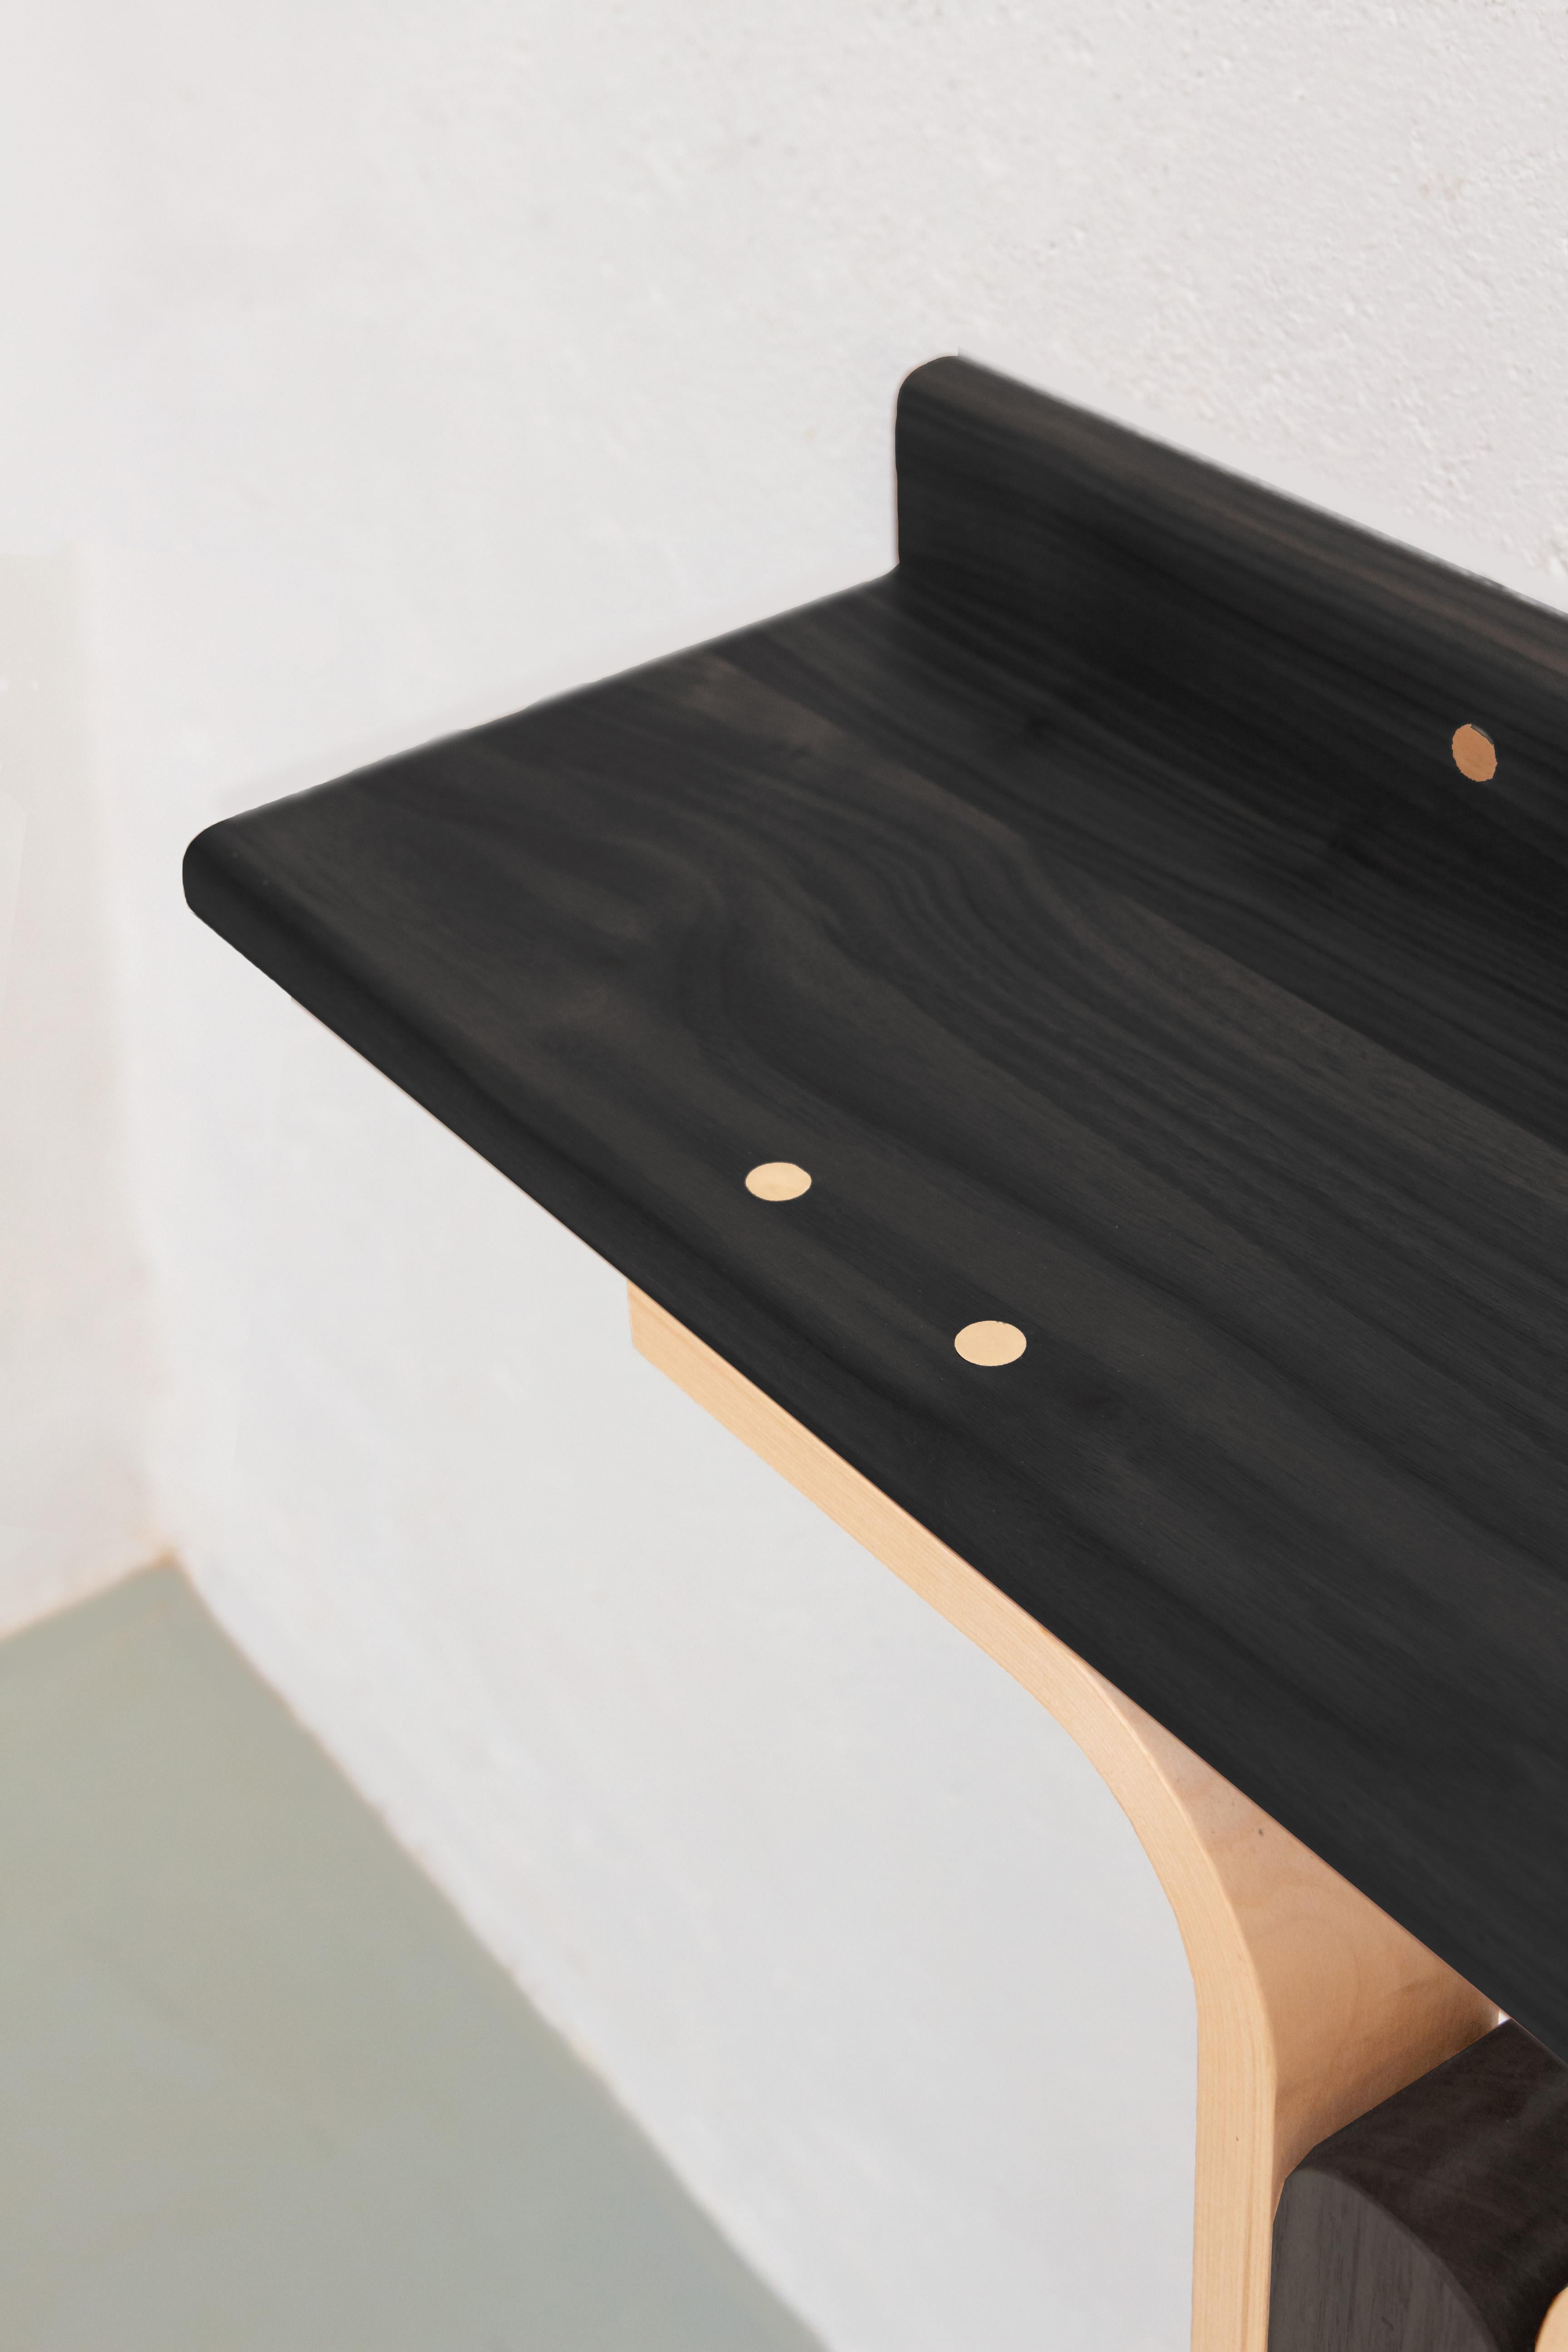 Solid black stained ash wood, ashwood bent elements, brass joinery.
Measures: 25 x 80 x 90 cm.
Designed by Ilaria Bianchi, Handmade in Italy by master carpenters.

The elegant 21st-century Rennie console table by Ilaria Bianchi is handcrafted in